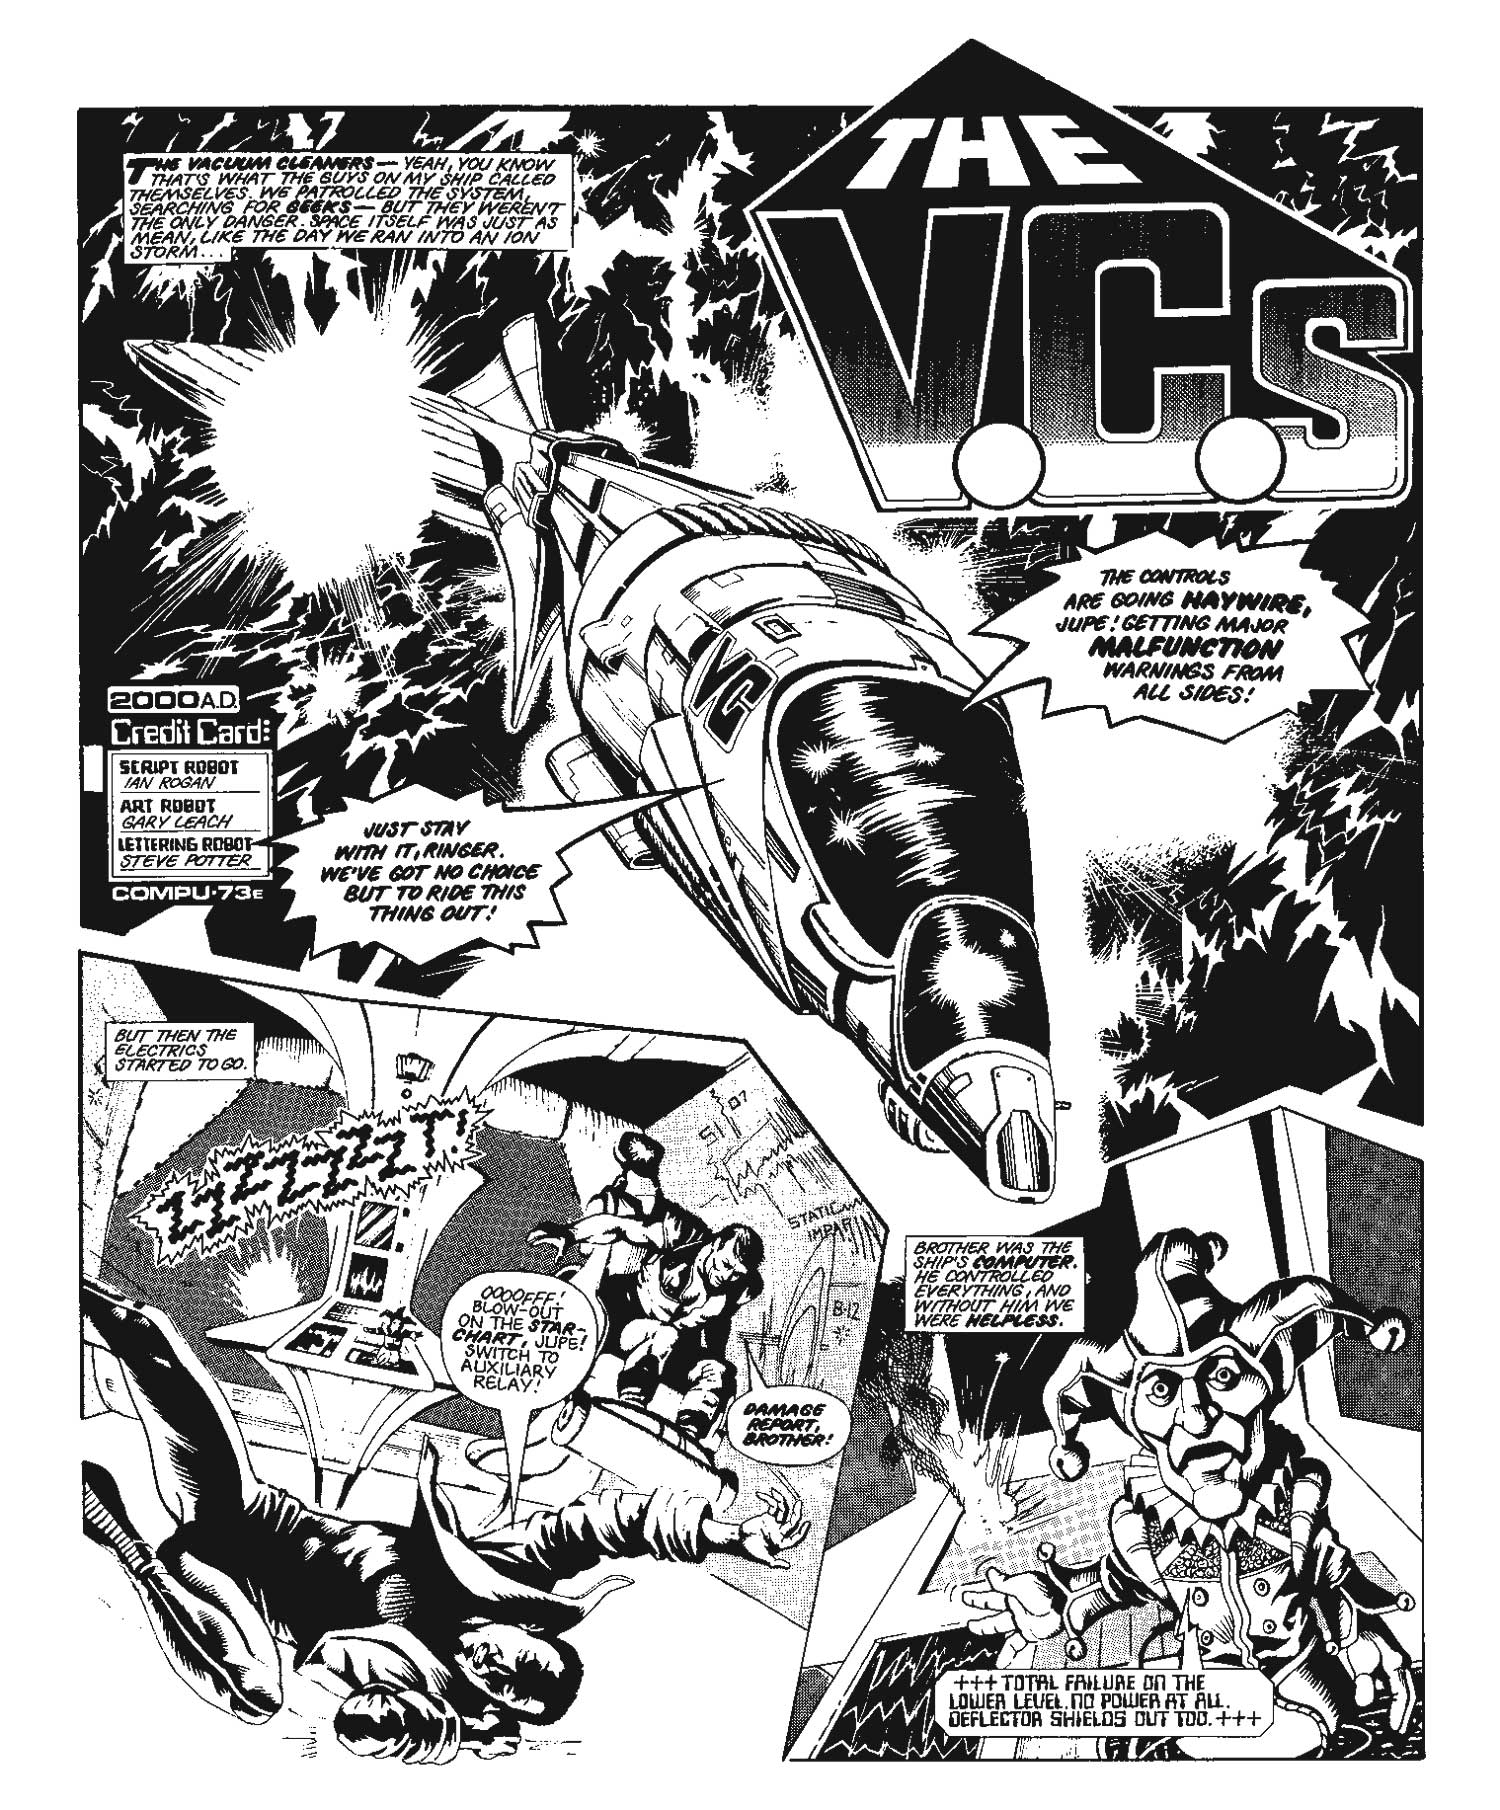 2000AD - The V.C.'s by Gerry Finley-Day, art by Garry Leach